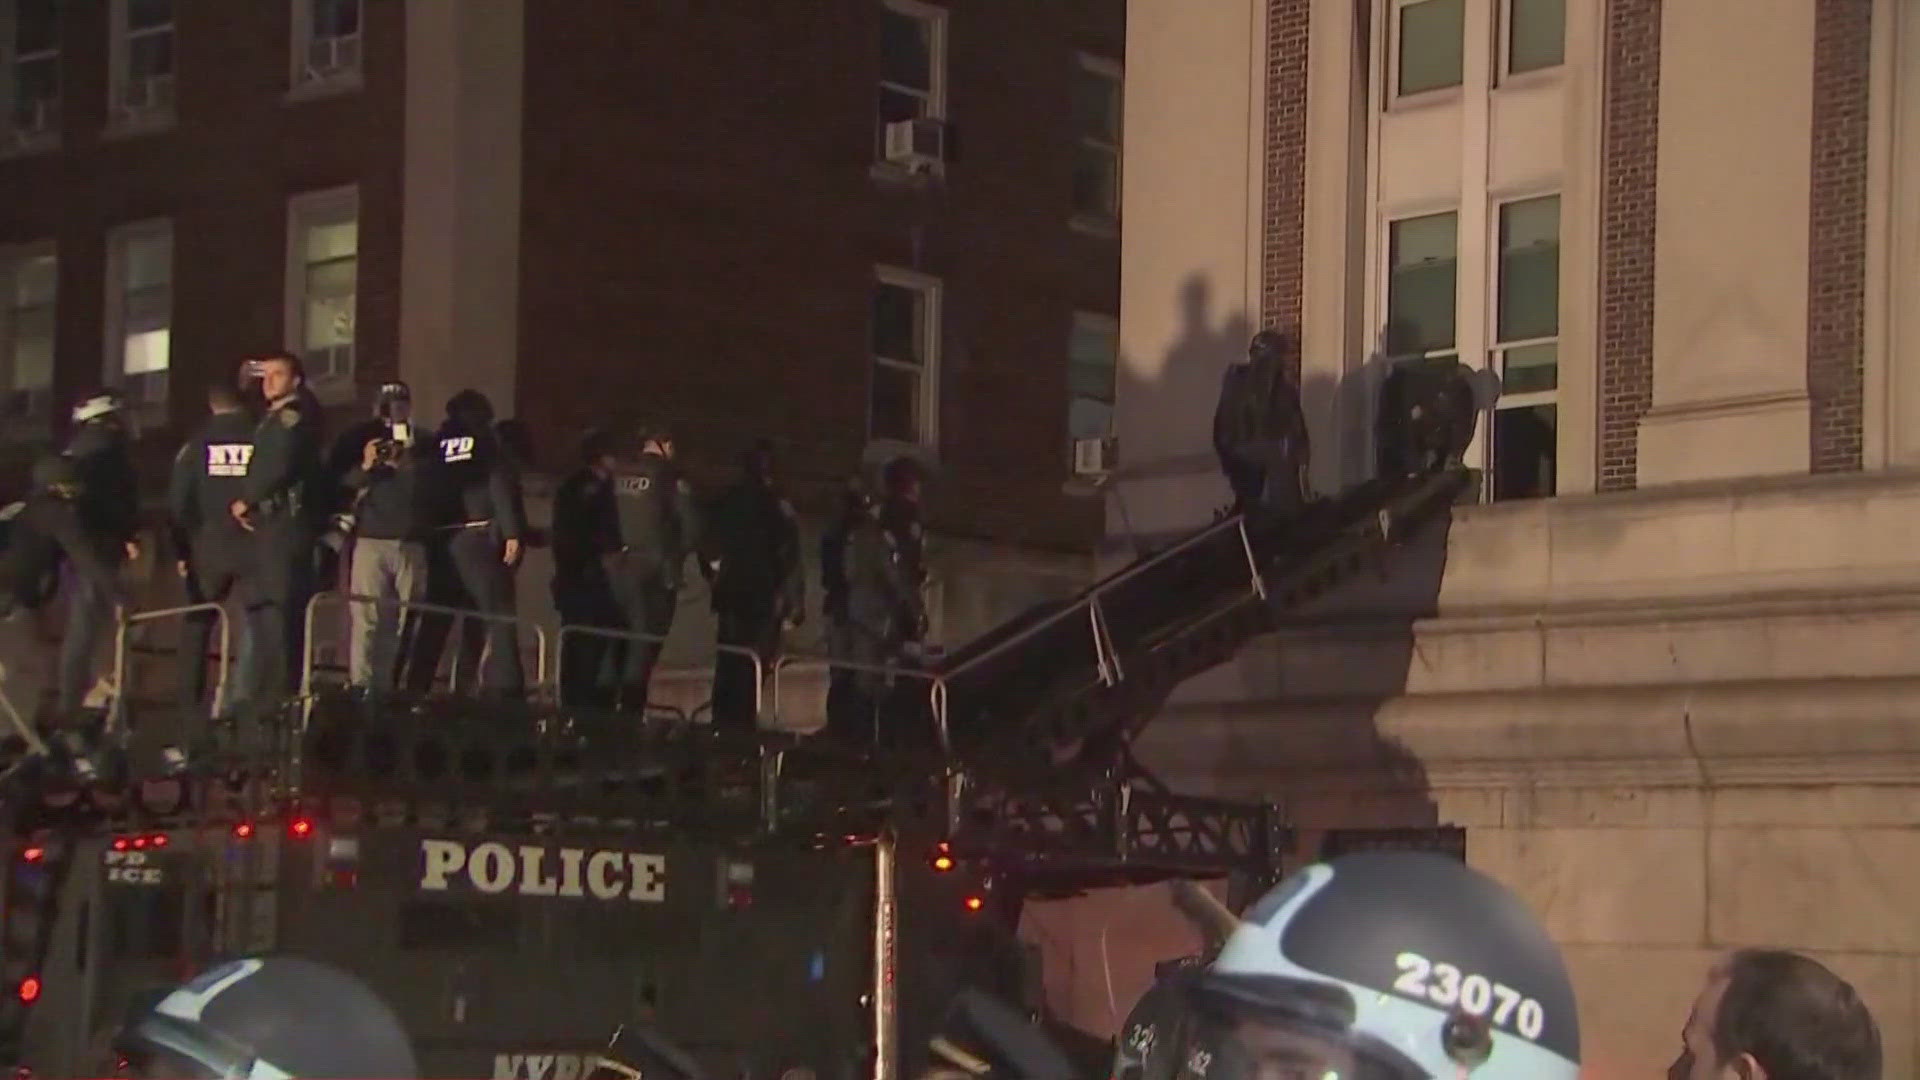 A statement released by a Columbia spokesperson said officers entered the campus after the university requested help.